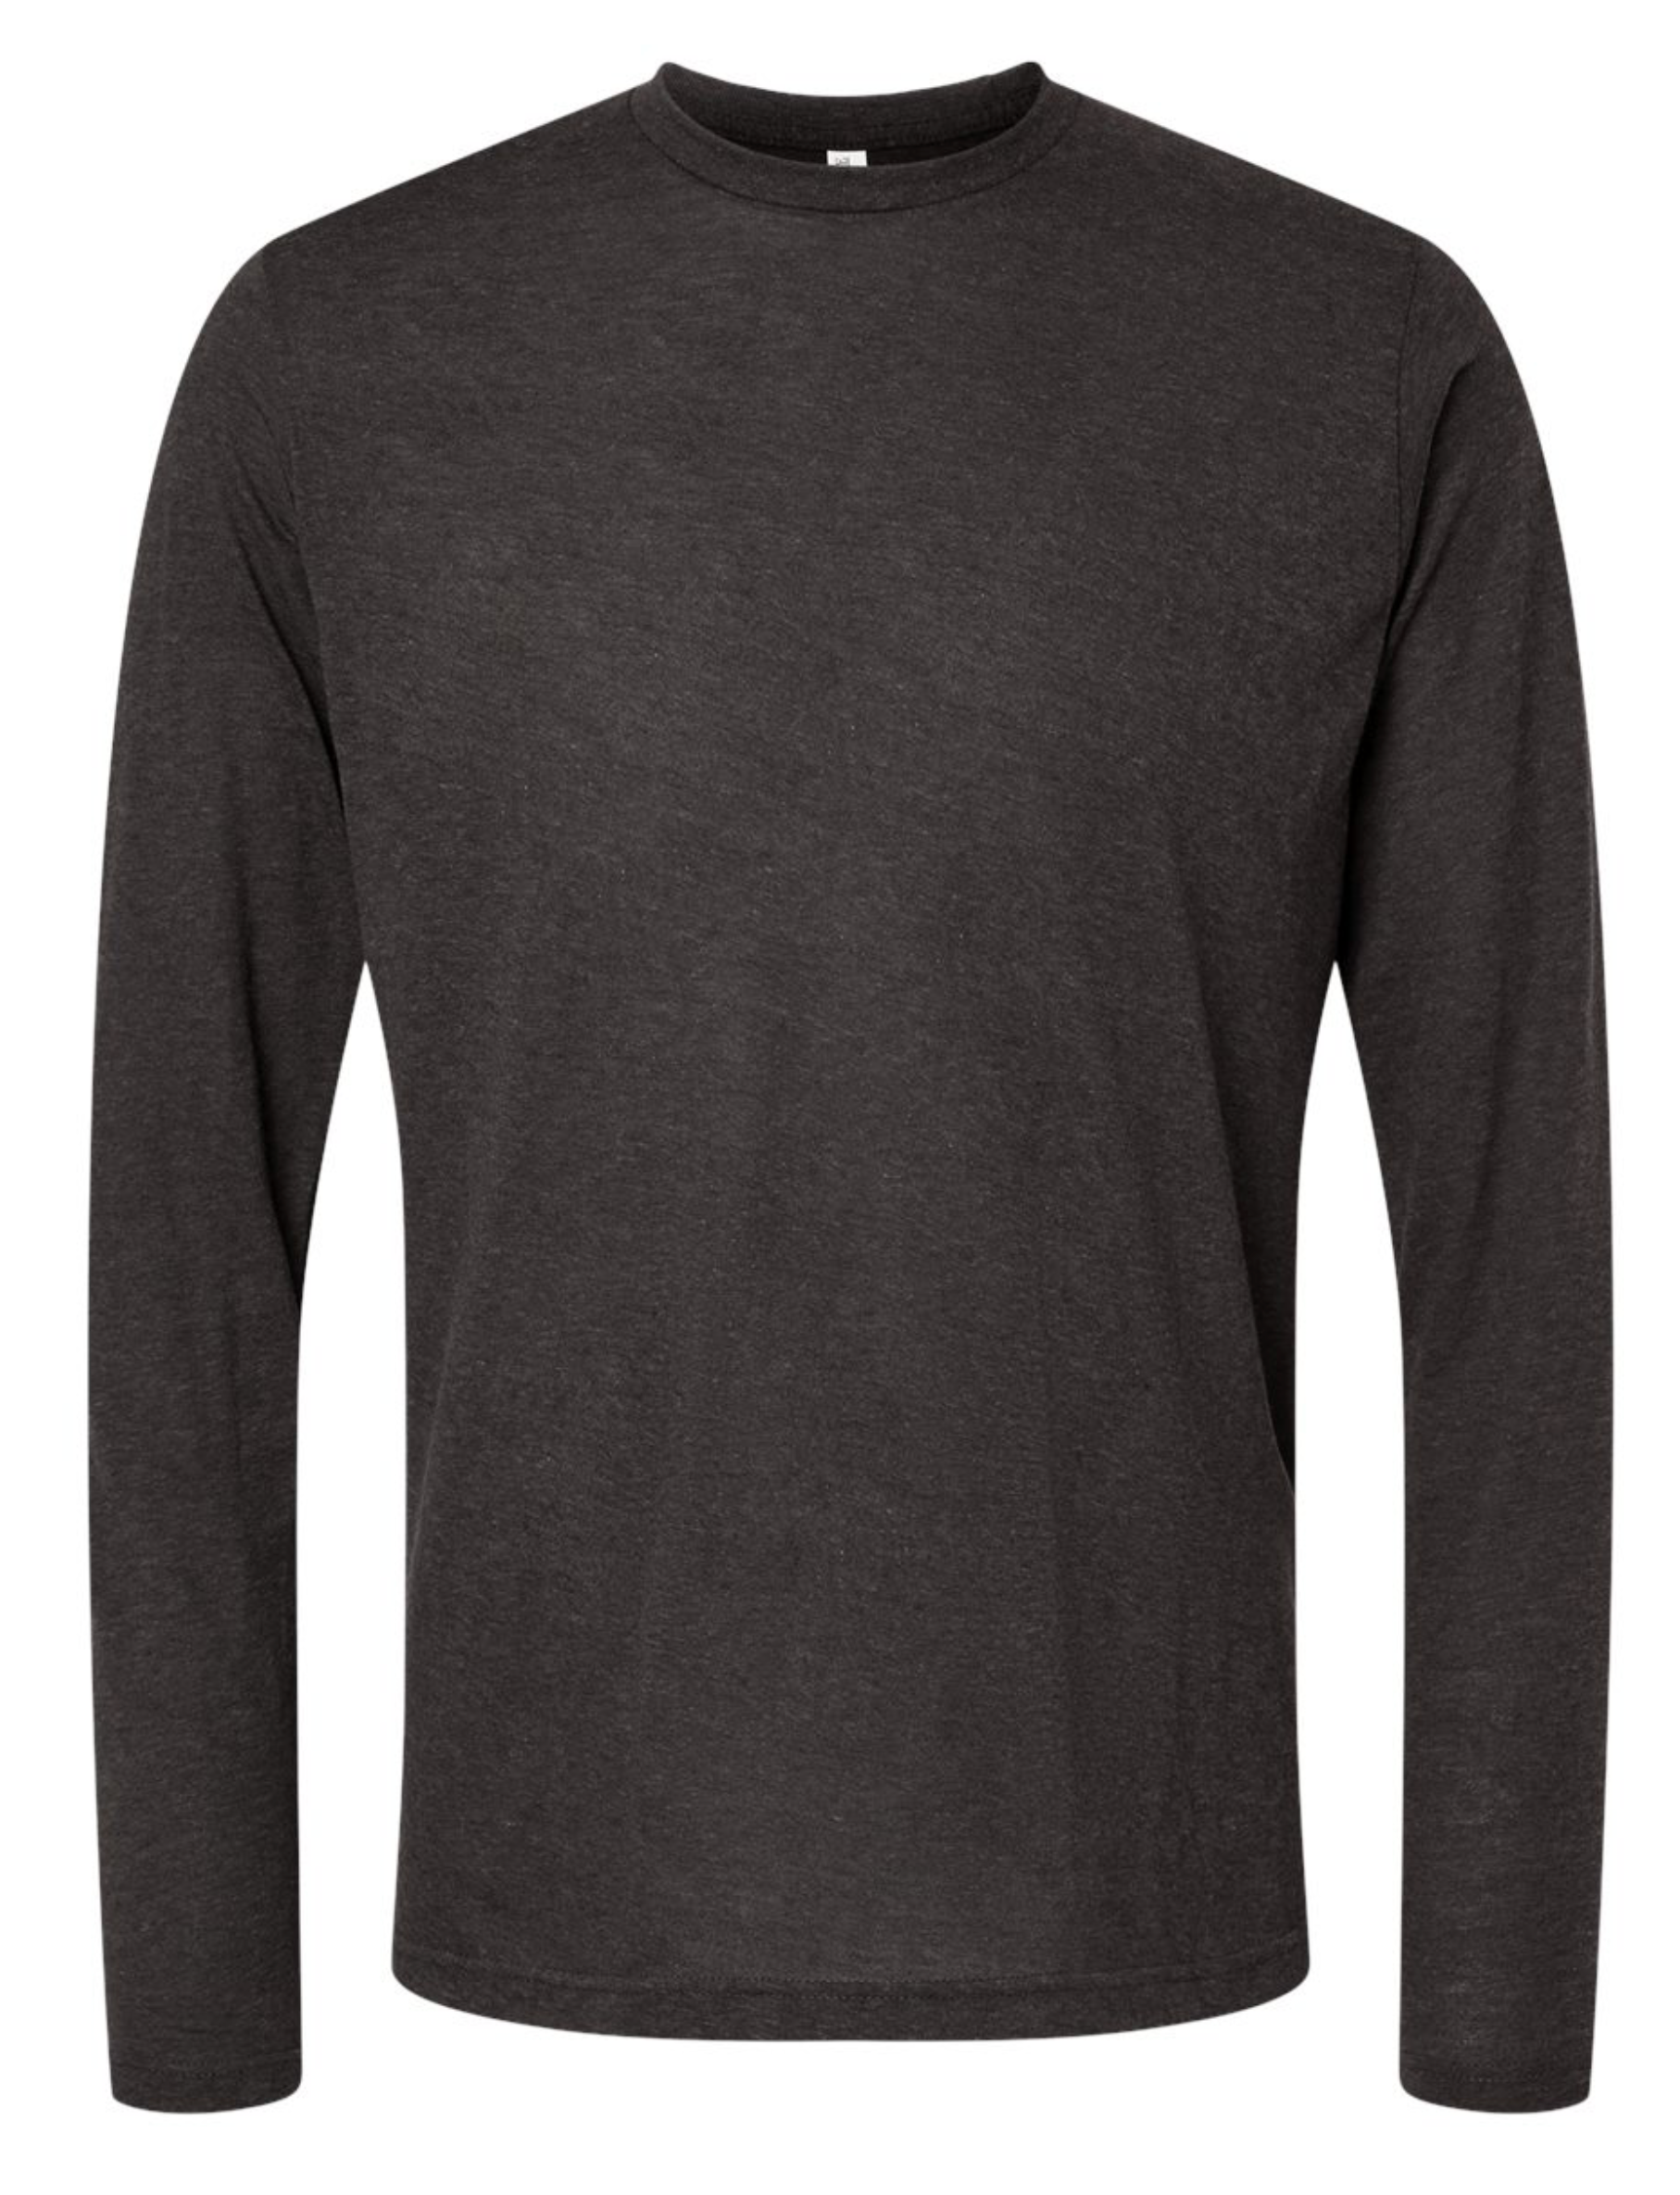 Long Sleeve Deluxe T-shirt Unisex Fit